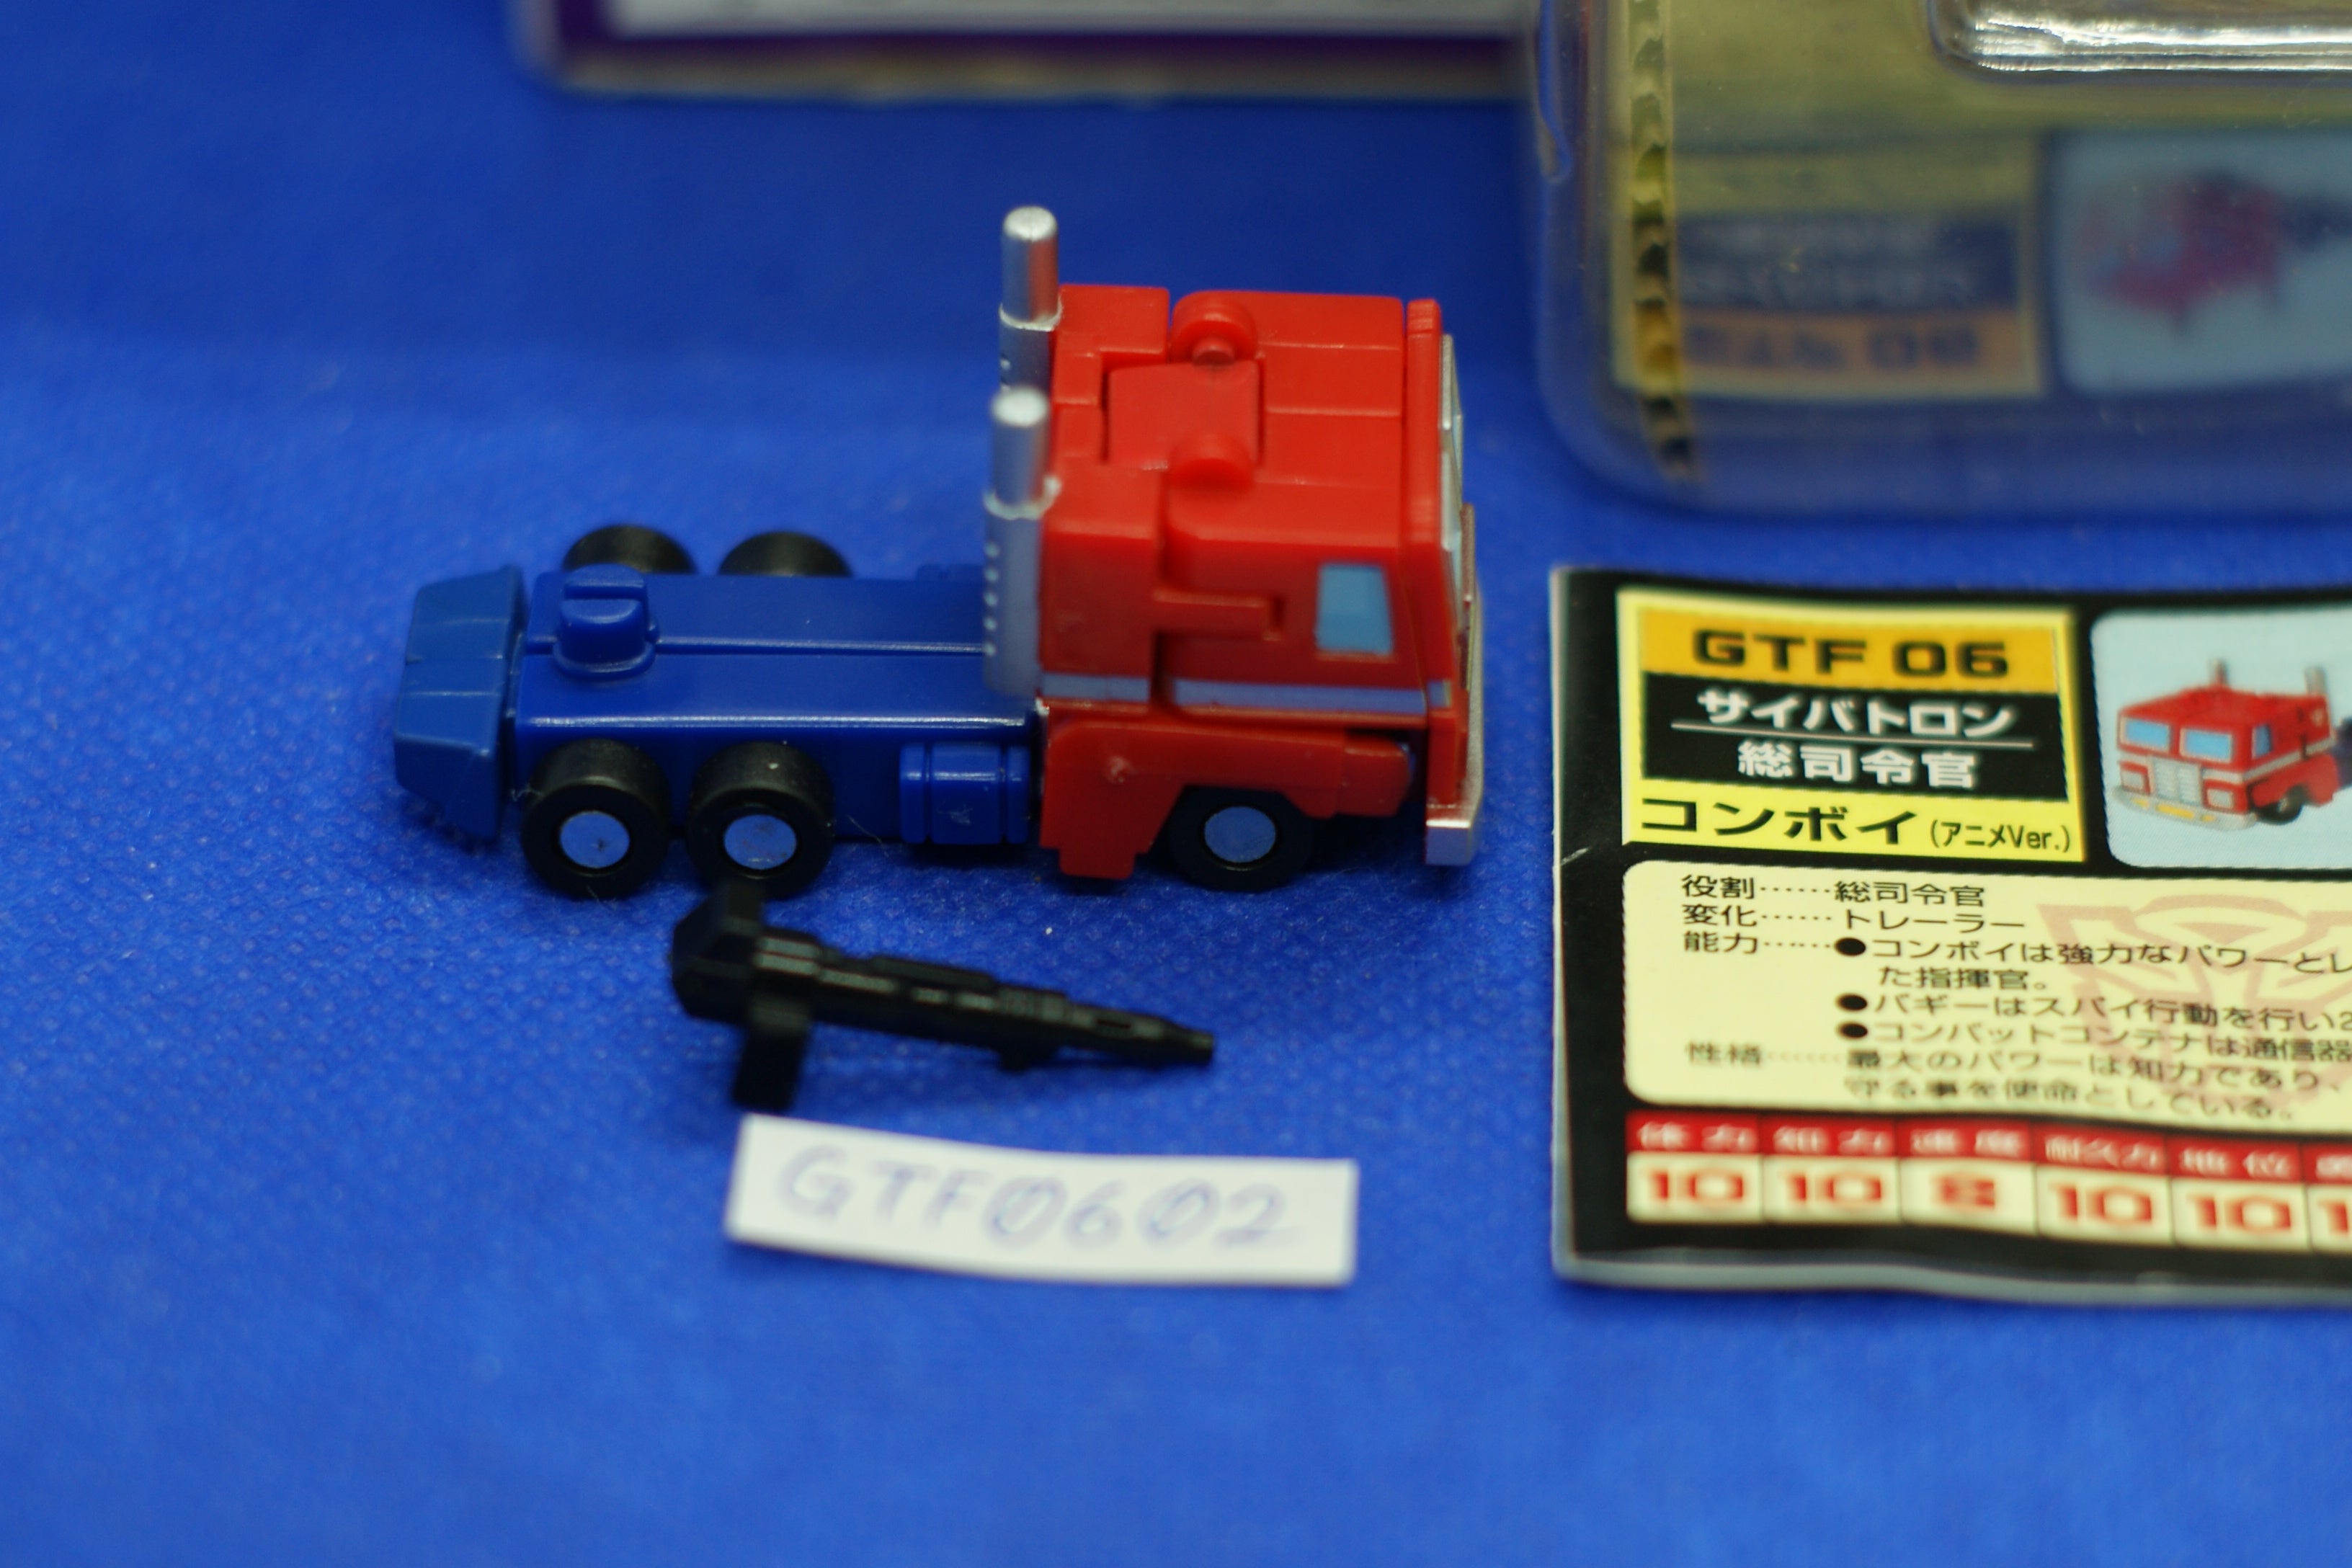 Transformers - Autobot: Optimus Prime (WST) (GTF0602) | All Aboard Games